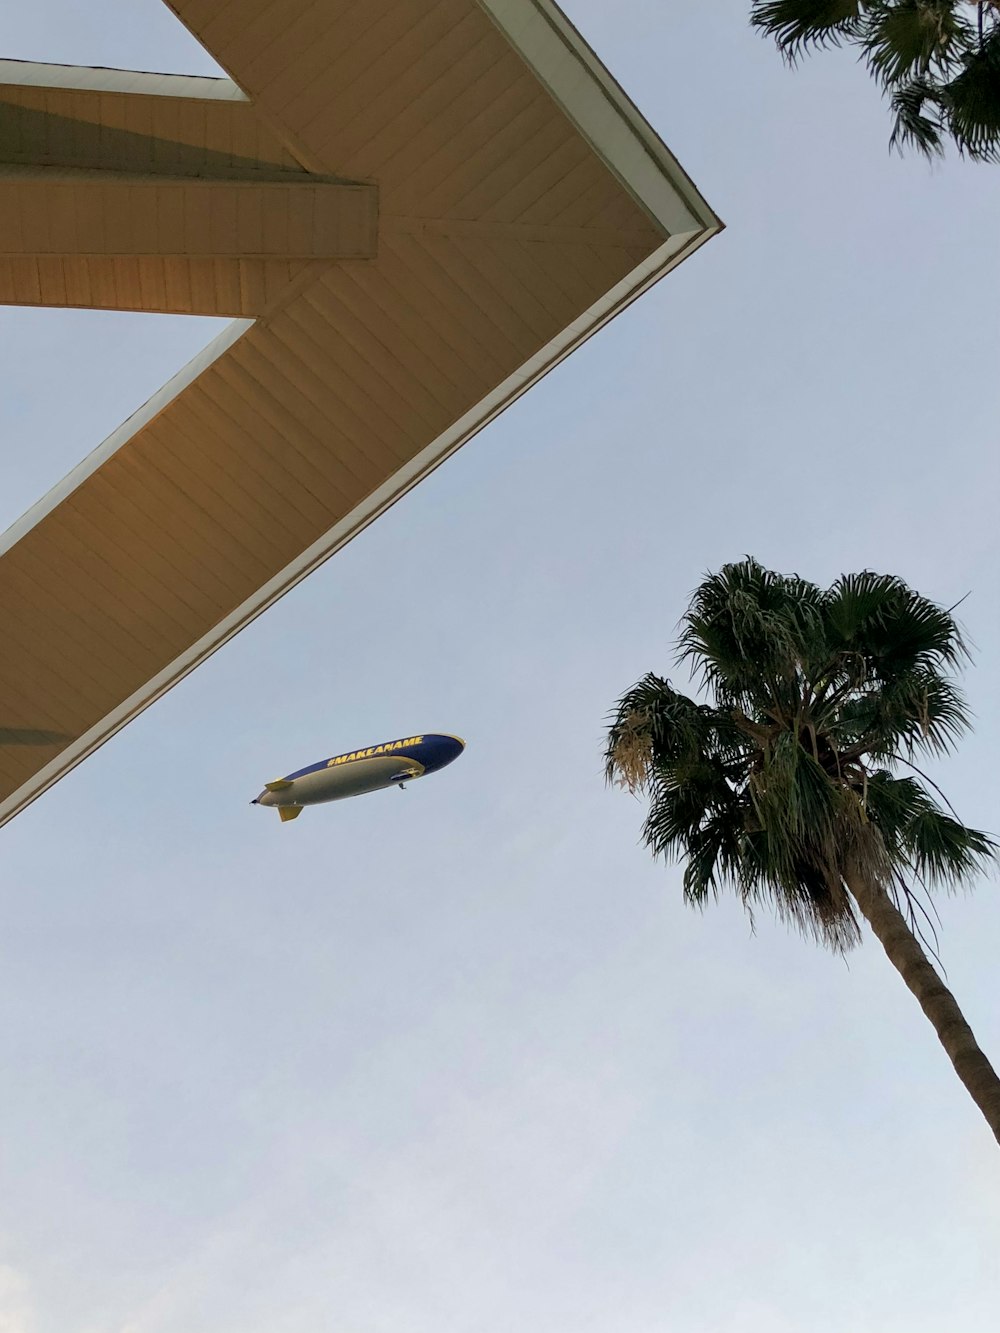 an airplane flying over a building